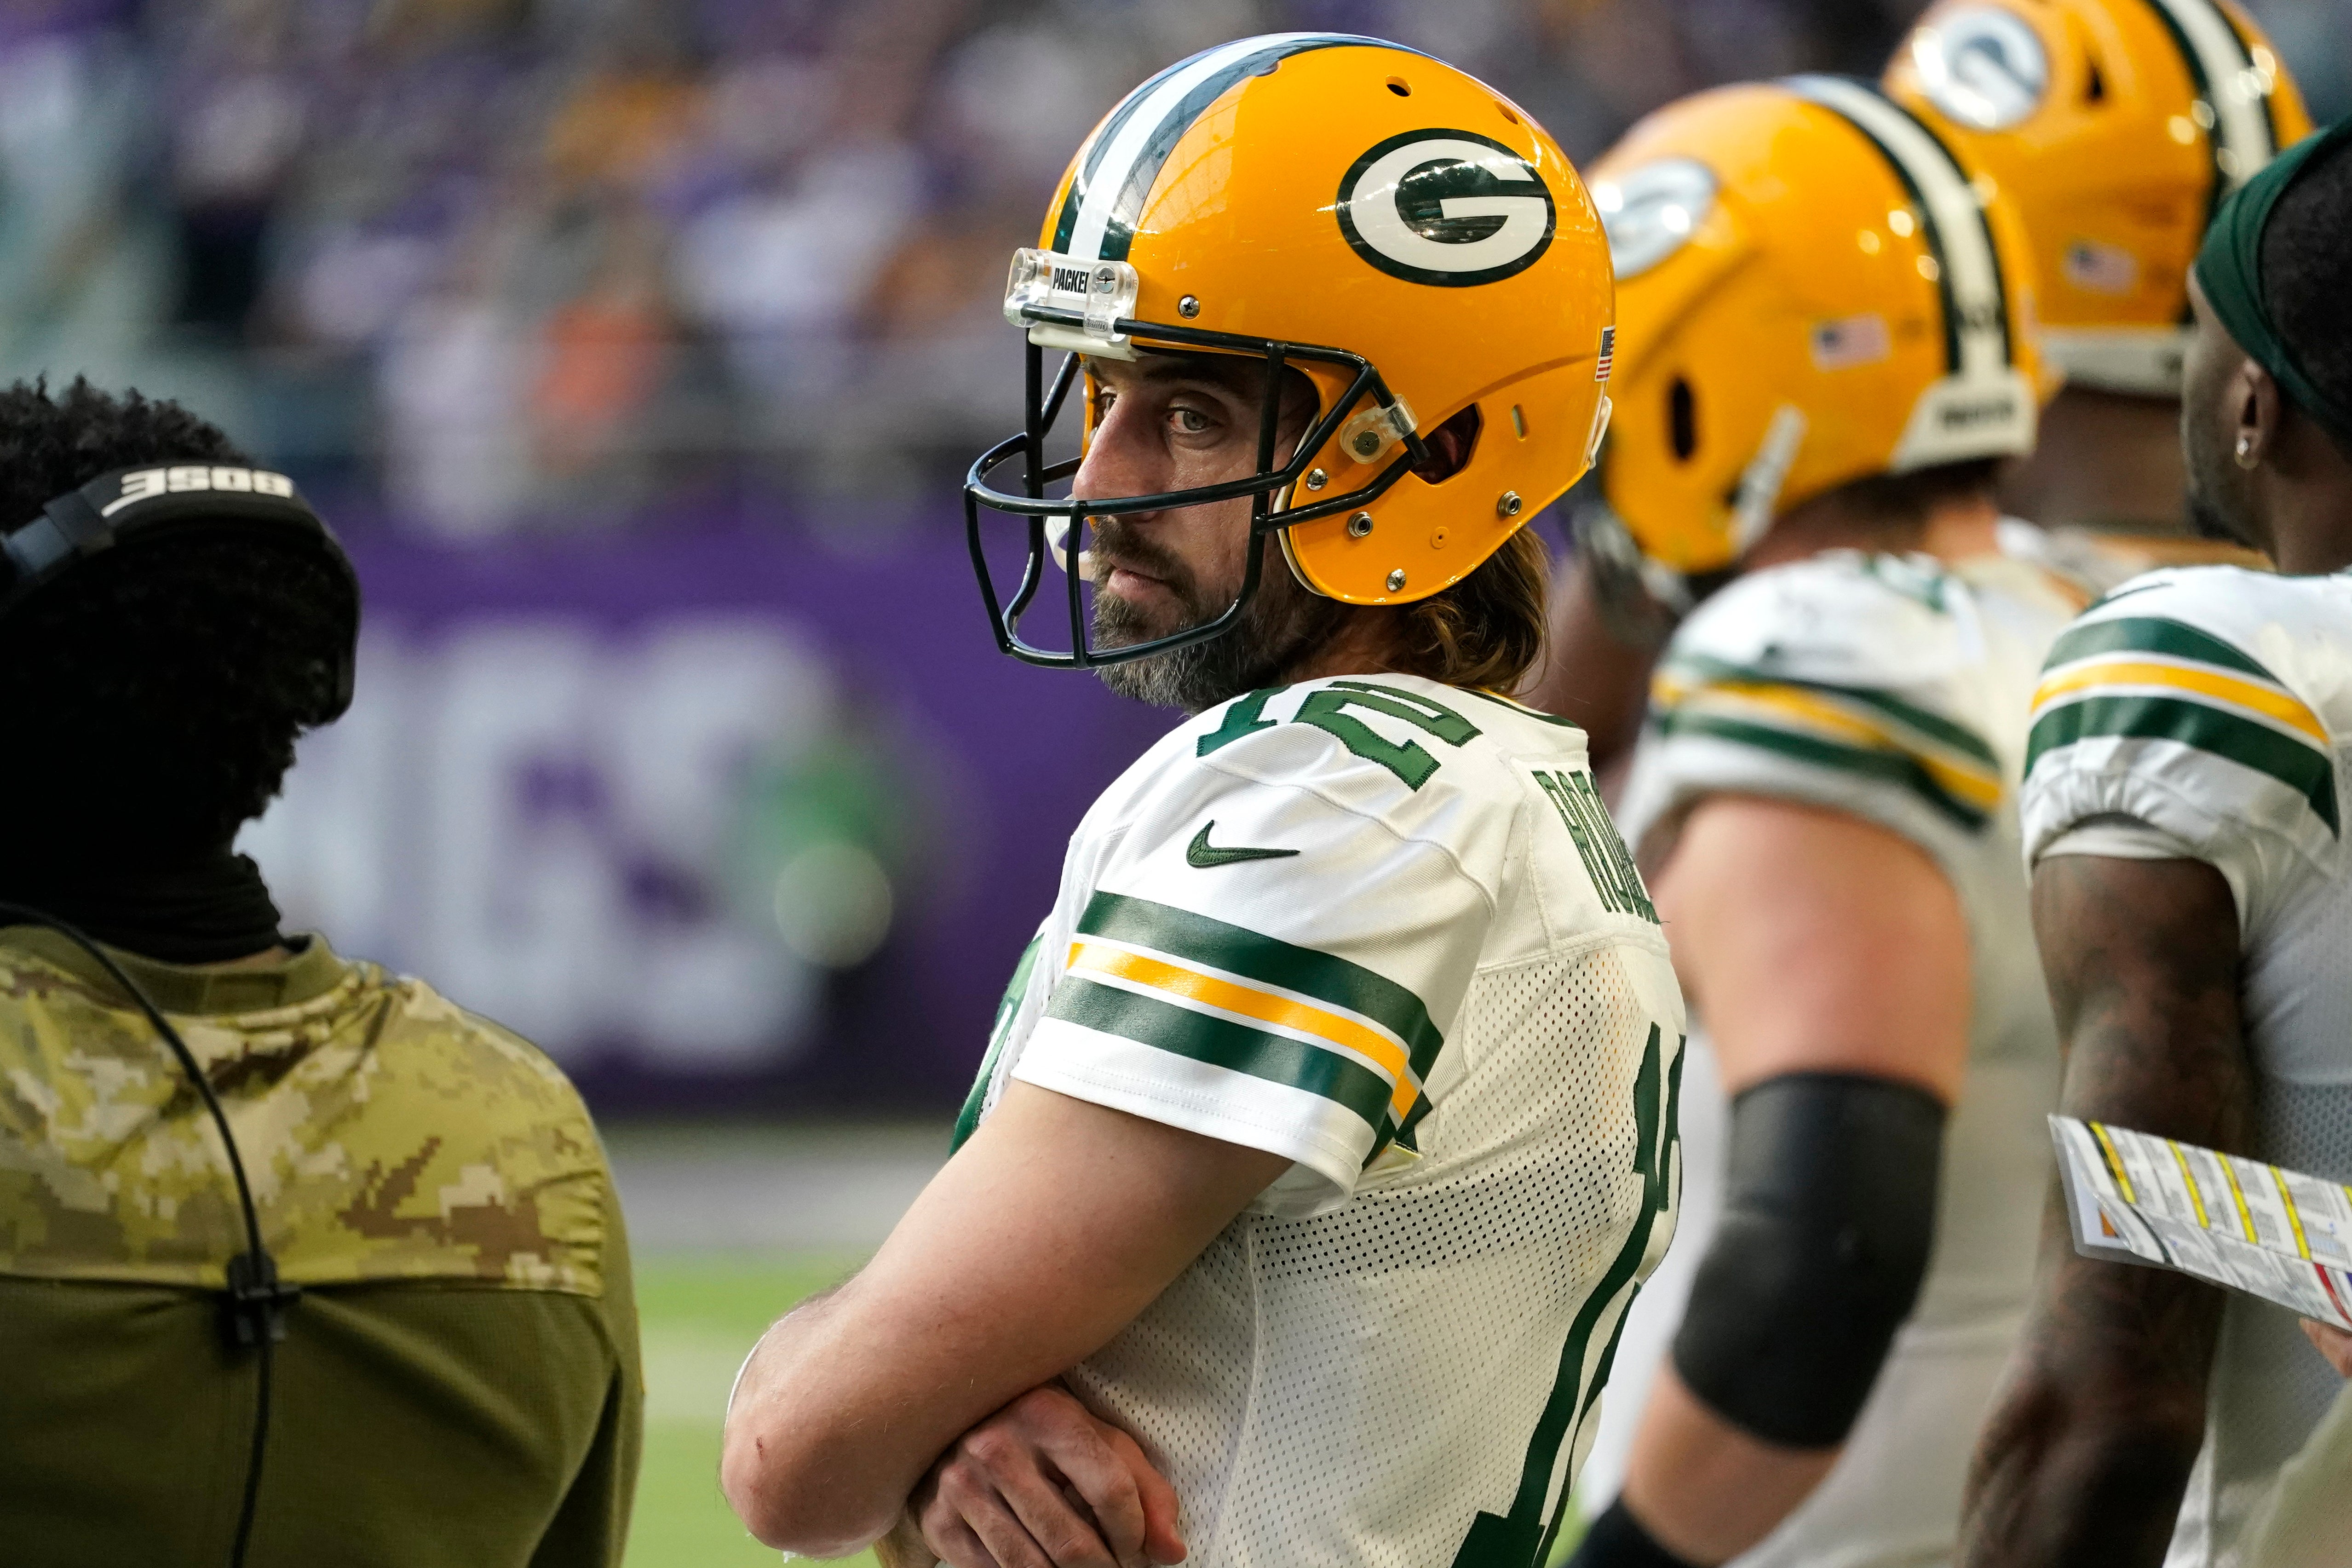 DEP-NFL PACKERS-RODGERS